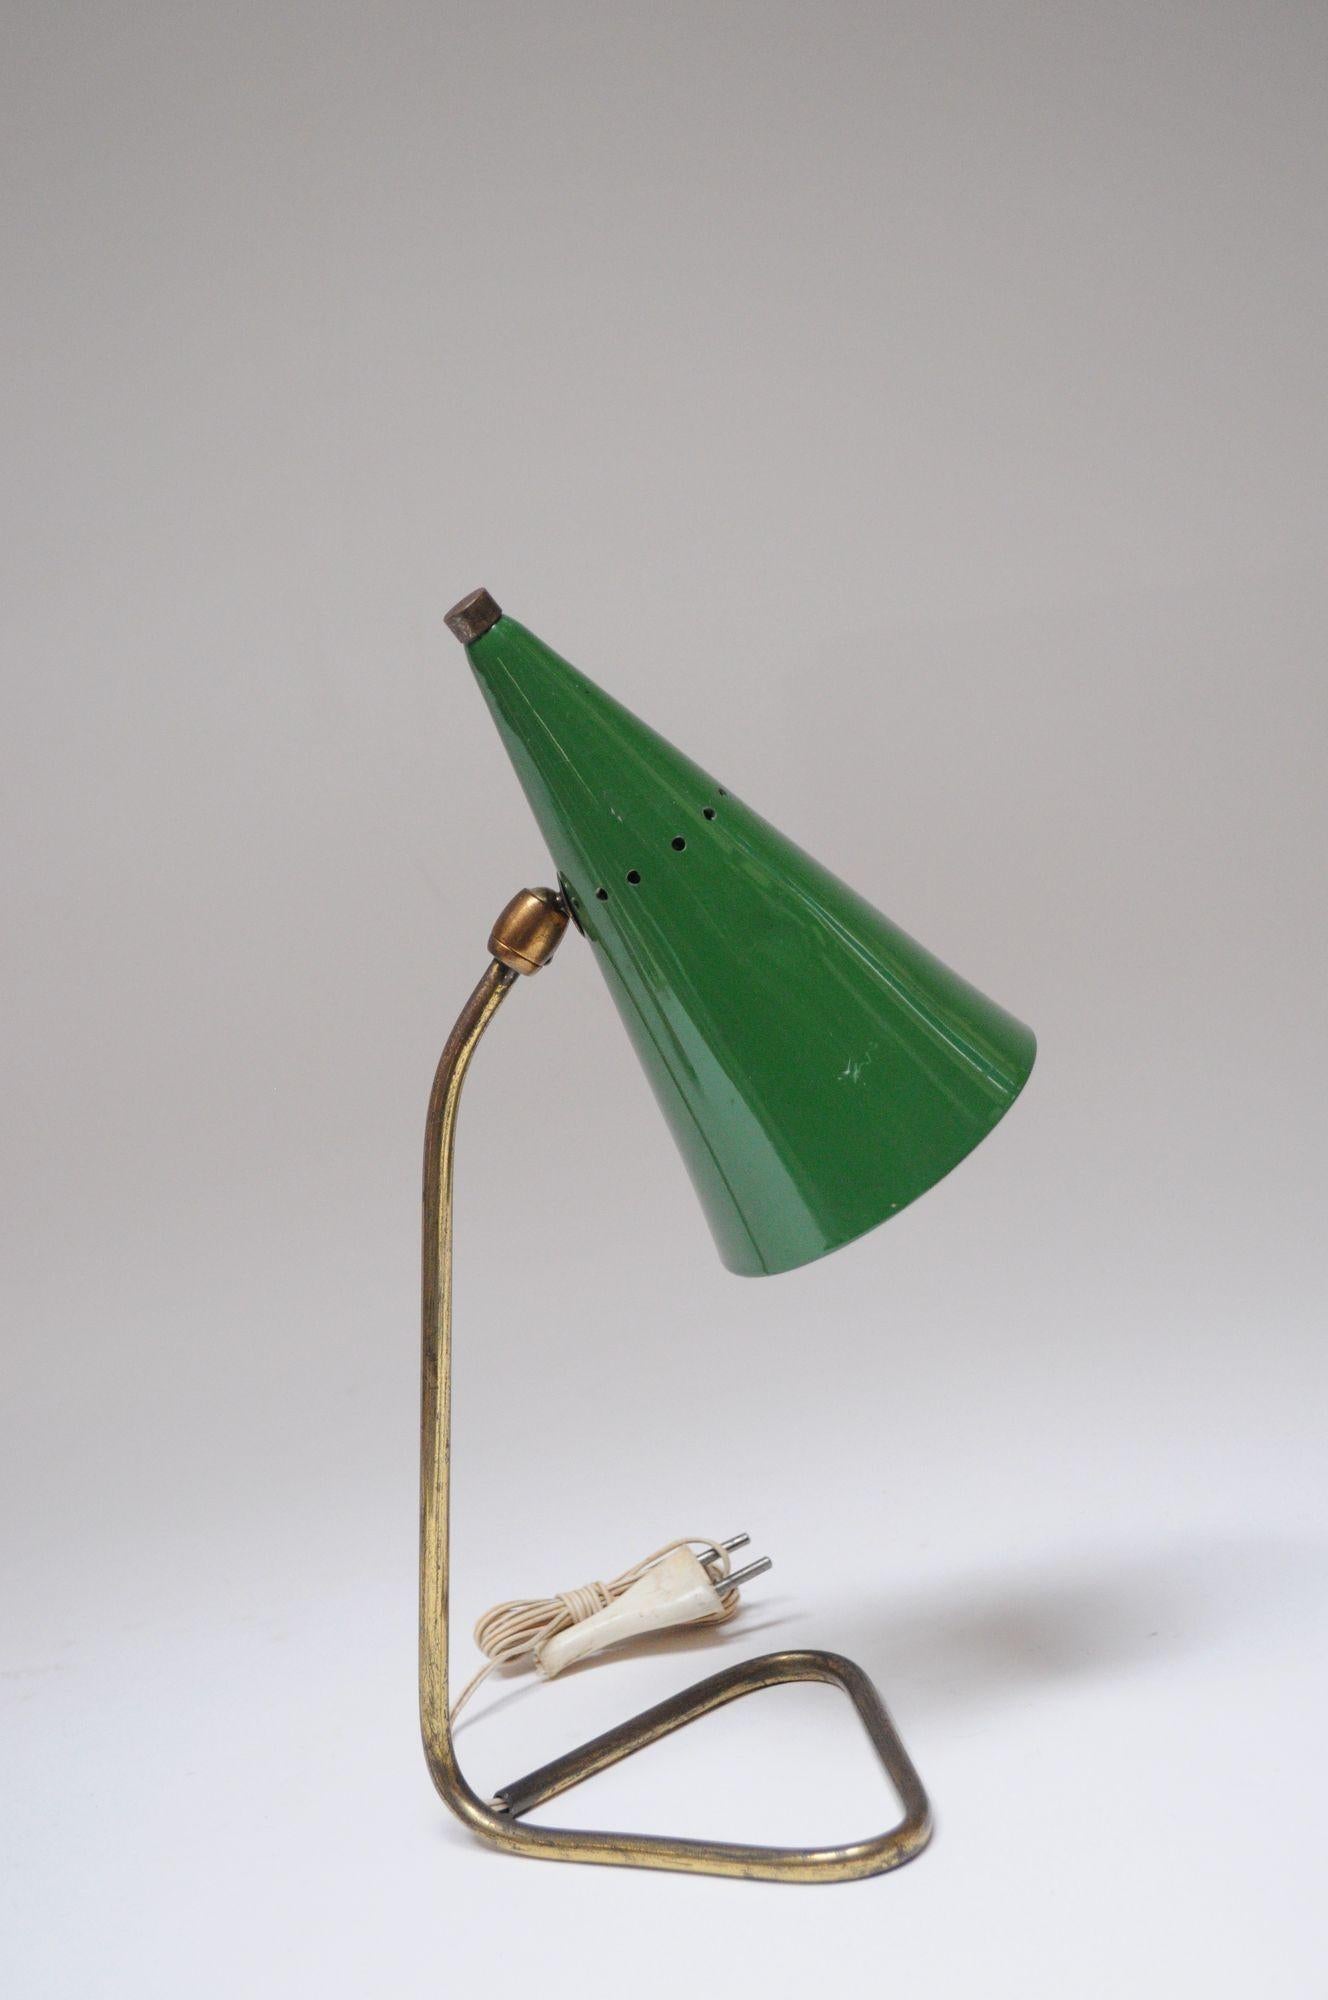 Charming, petite table/bedside lamp by Gilardi and Barzaghi (ca. 1953/54, Italy).
Composed of a perforated, conical shade in green lacquered metal supported by a tubular brass base.
Original condition with age/wear present to the shade (two small